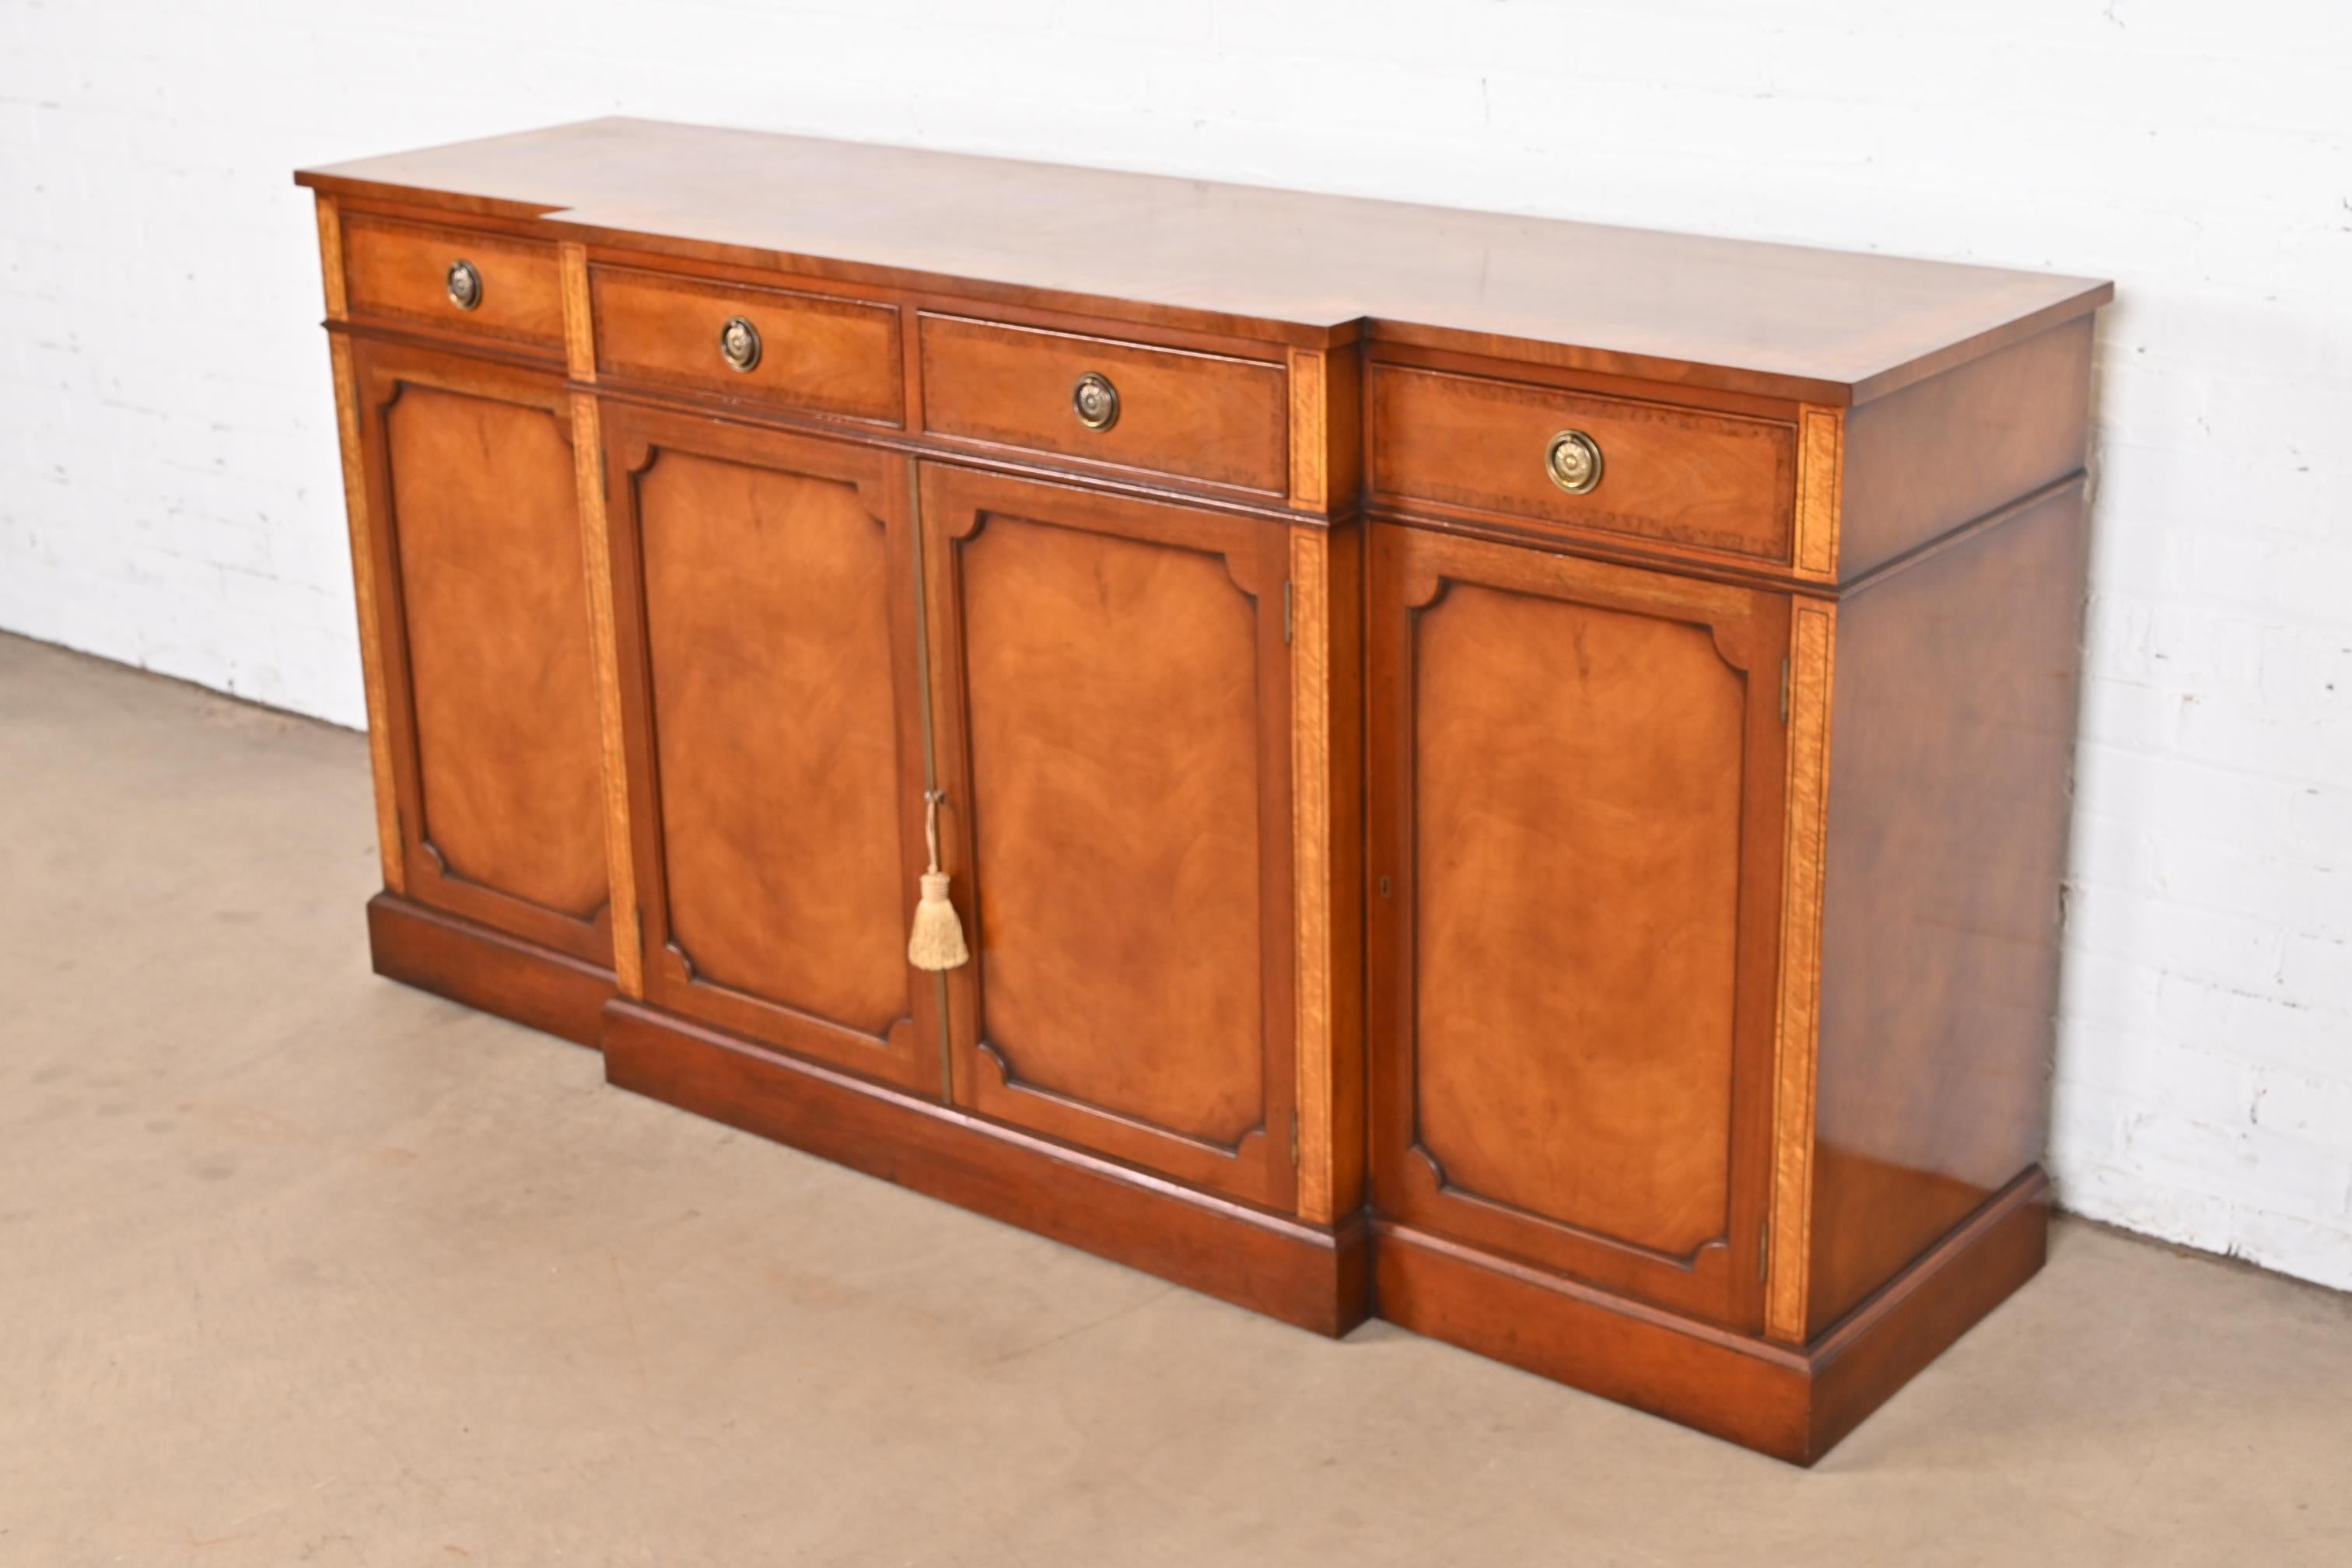 20th Century English Georgian Banded Mahogany Sideboard by Restall Brown & Clennell For Sale